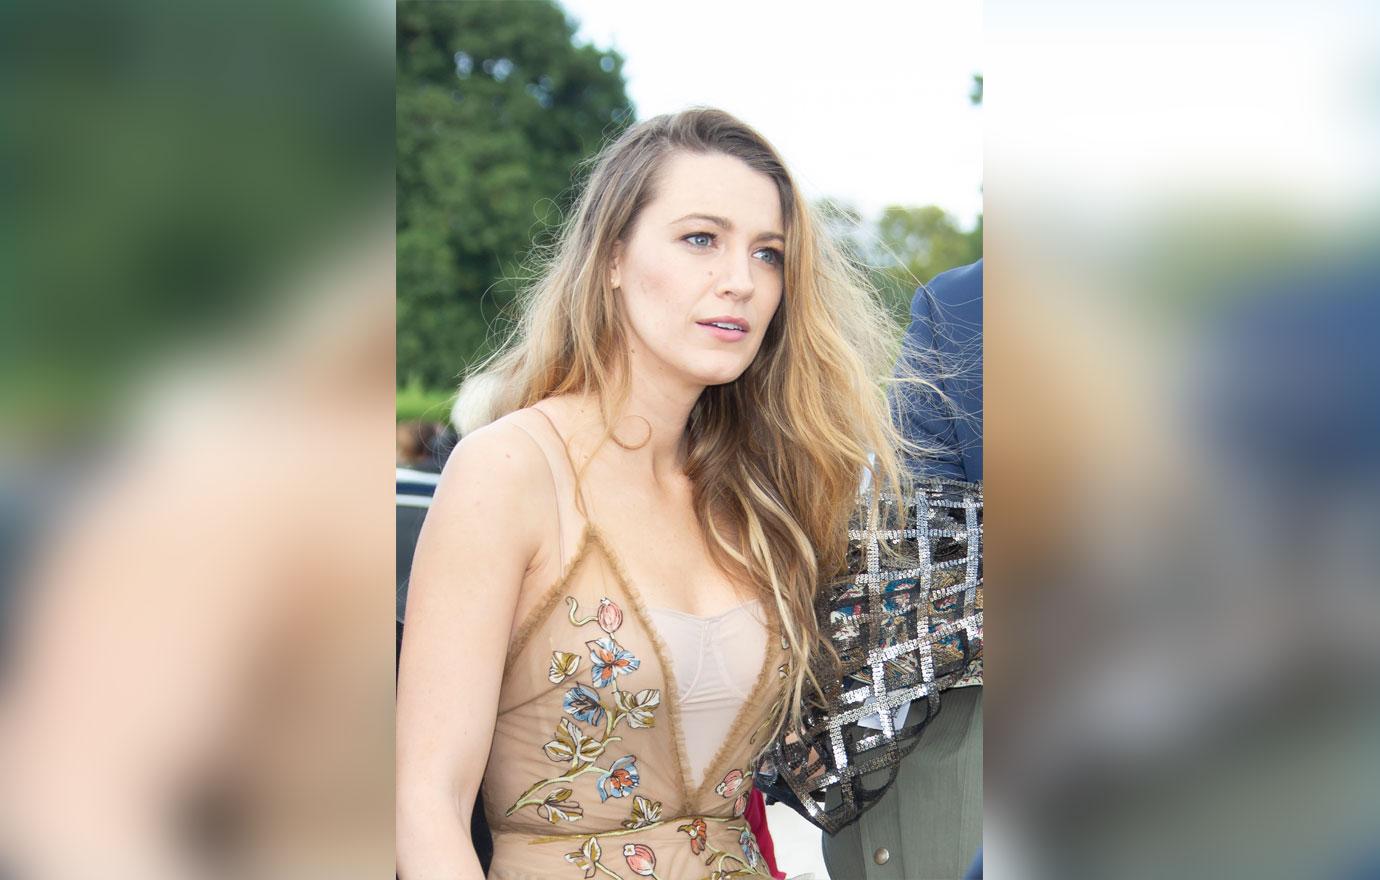 Blake Lively Shuts Down Double Standard Over 'A Simple Favor